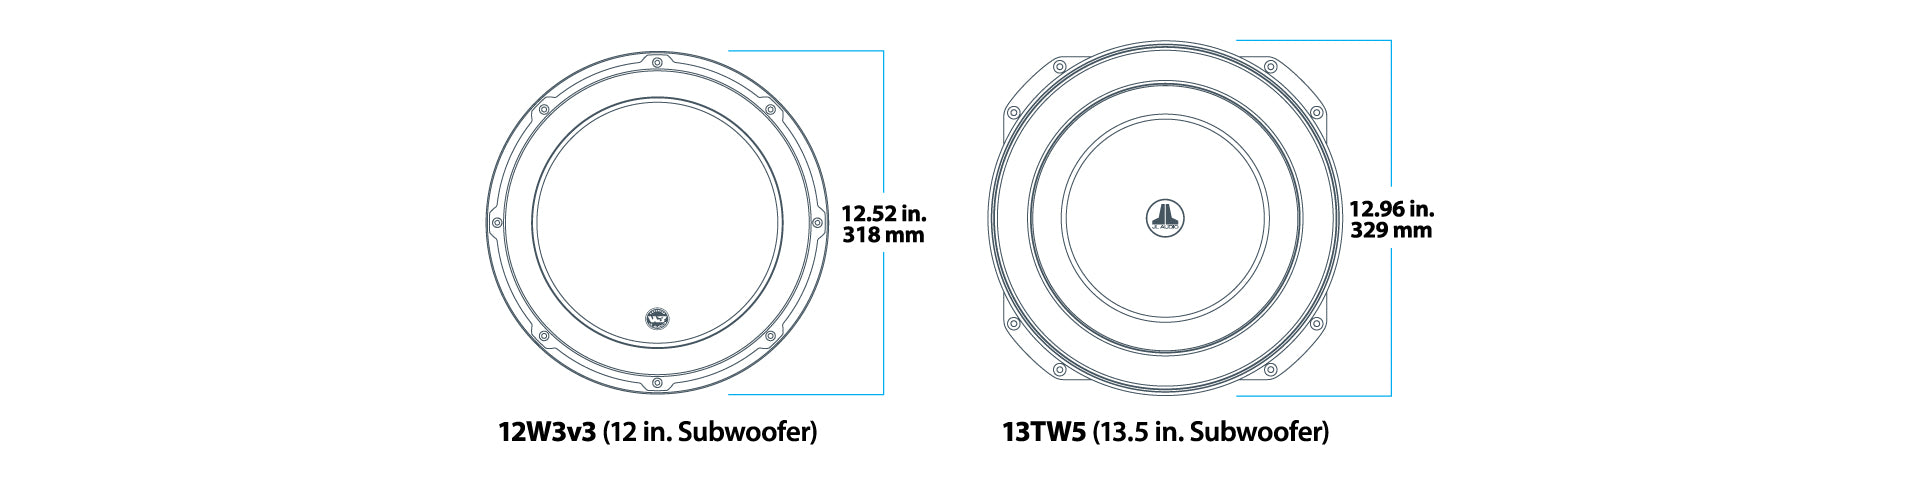 A comparison view diagram of “Tab-Ear” frame design on a 13TW5 13.5-inch driver next to a 12-inch conventional woofer.